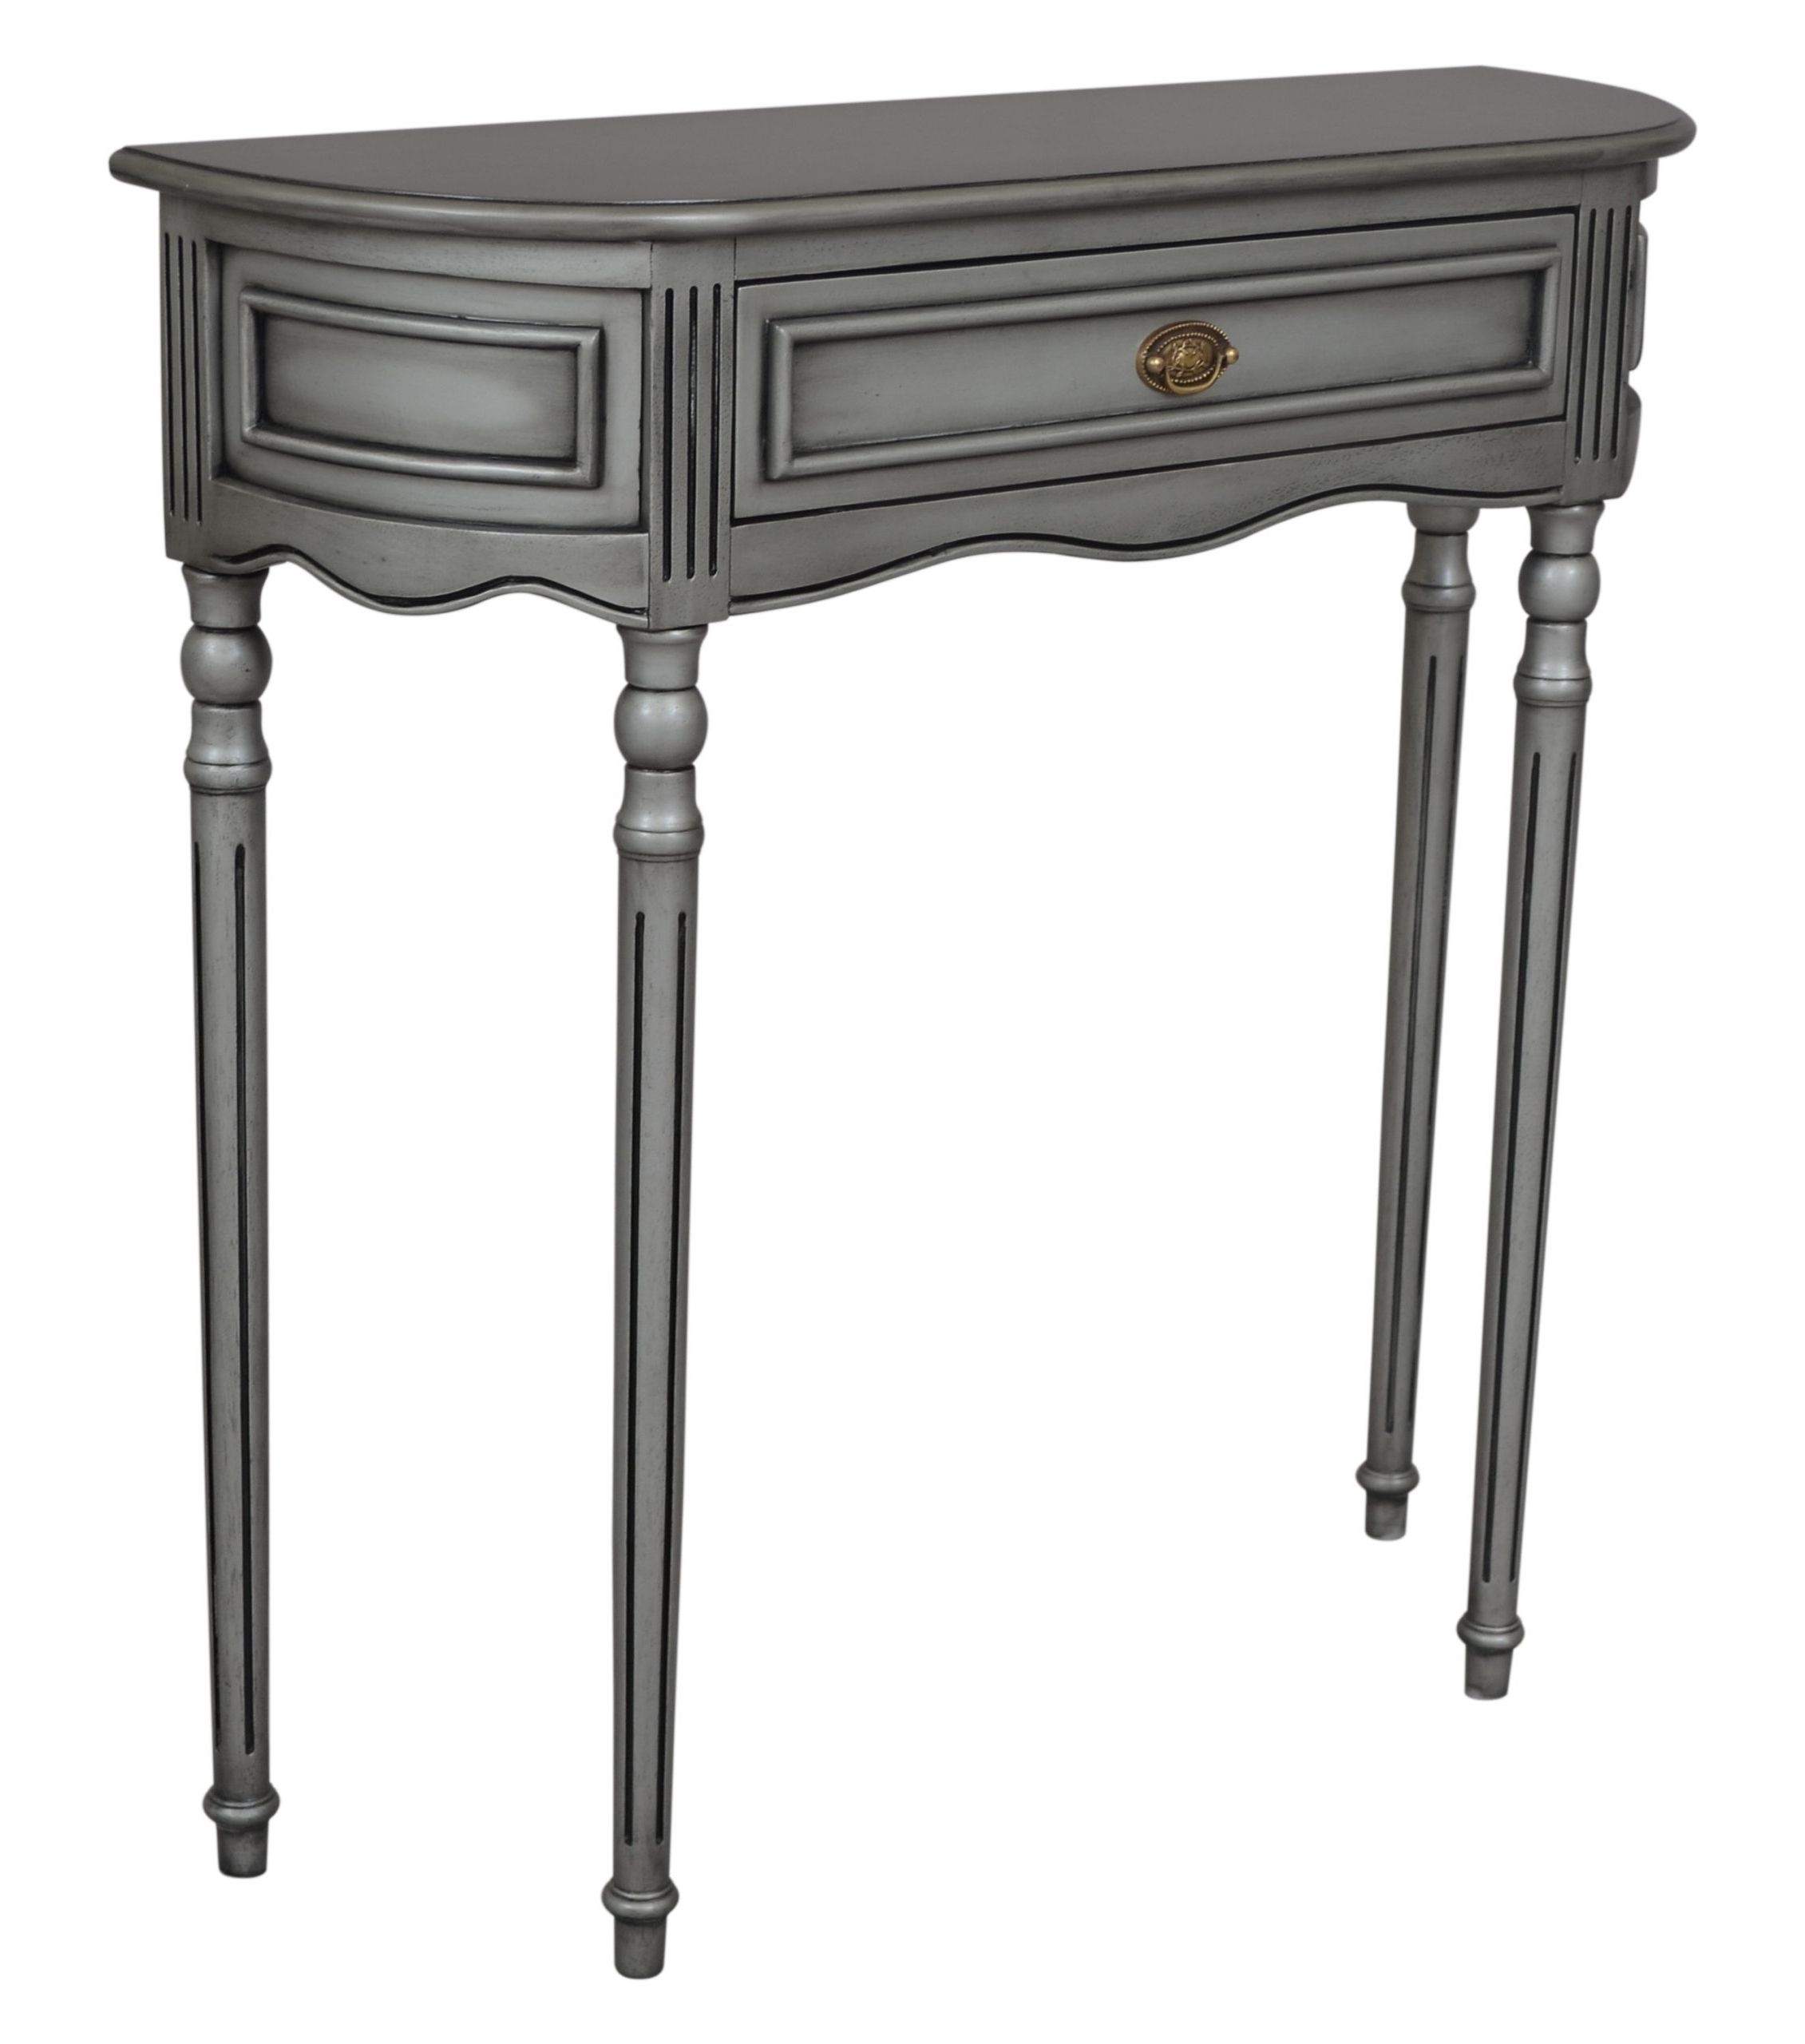 Metallic Silver Console Tables Regarding Well Liked Heritage 1 Drawer Console Table – Silver – Kelston House (View 8 of 10)